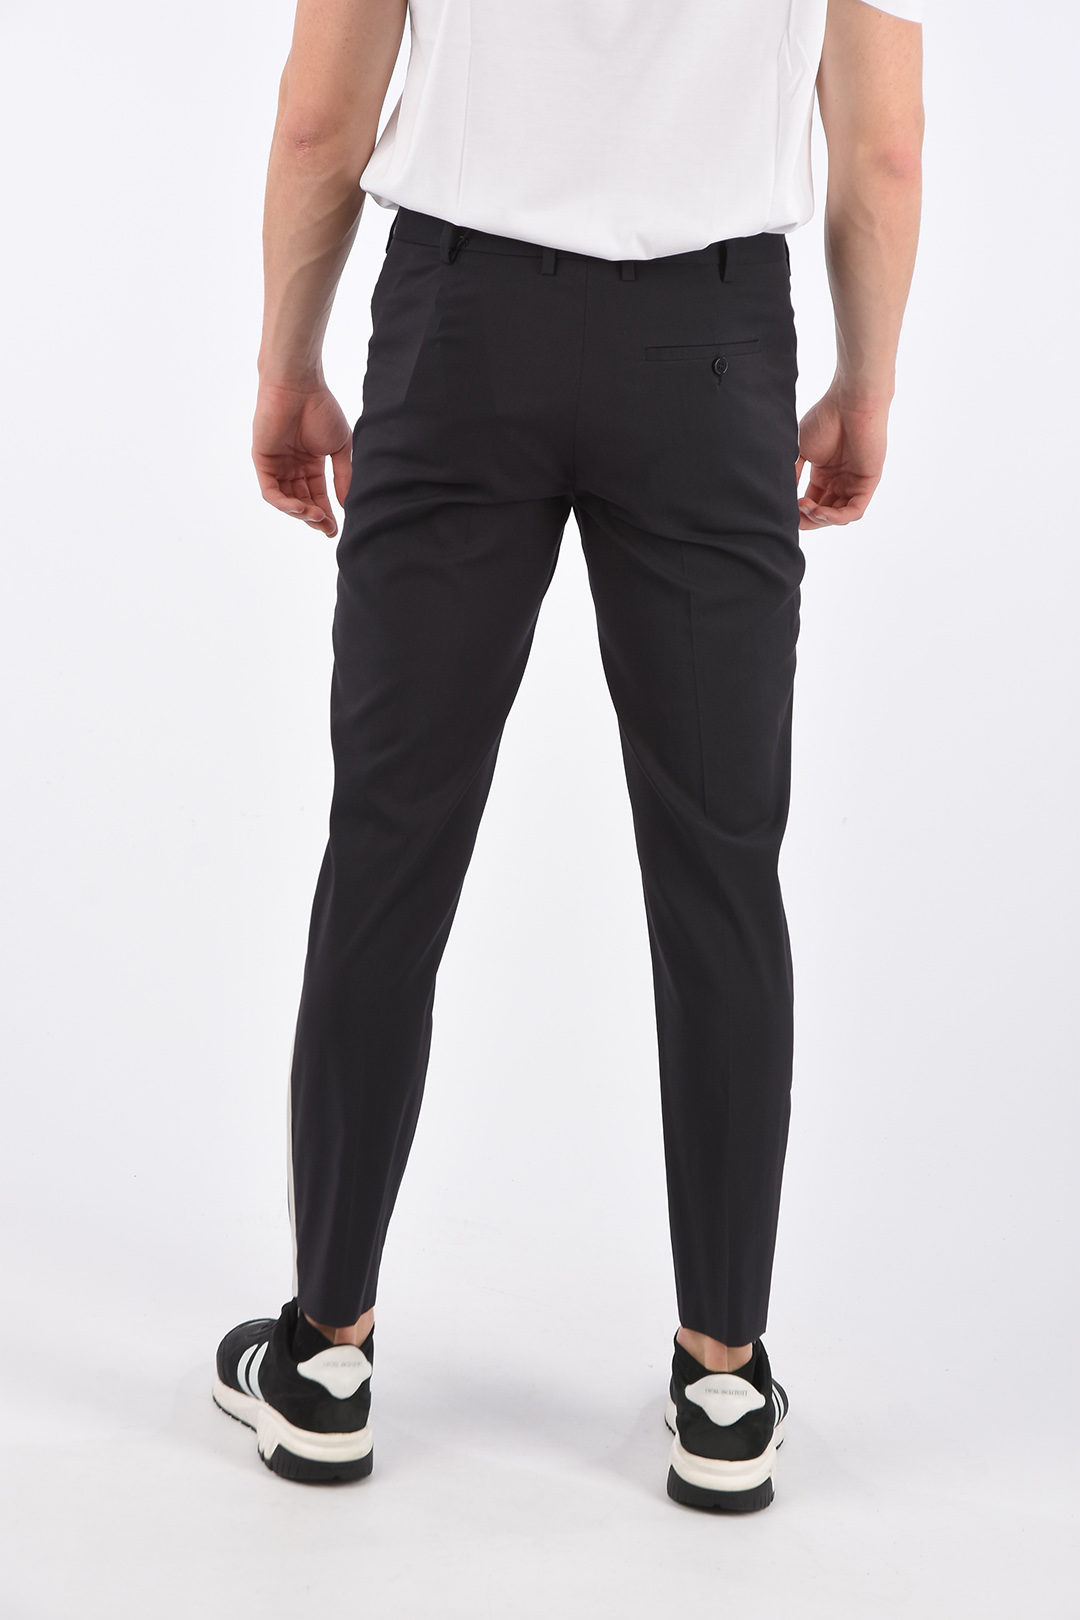 Neil Barrett Piping Pants with Ankle Zip men - Glamood Outlet